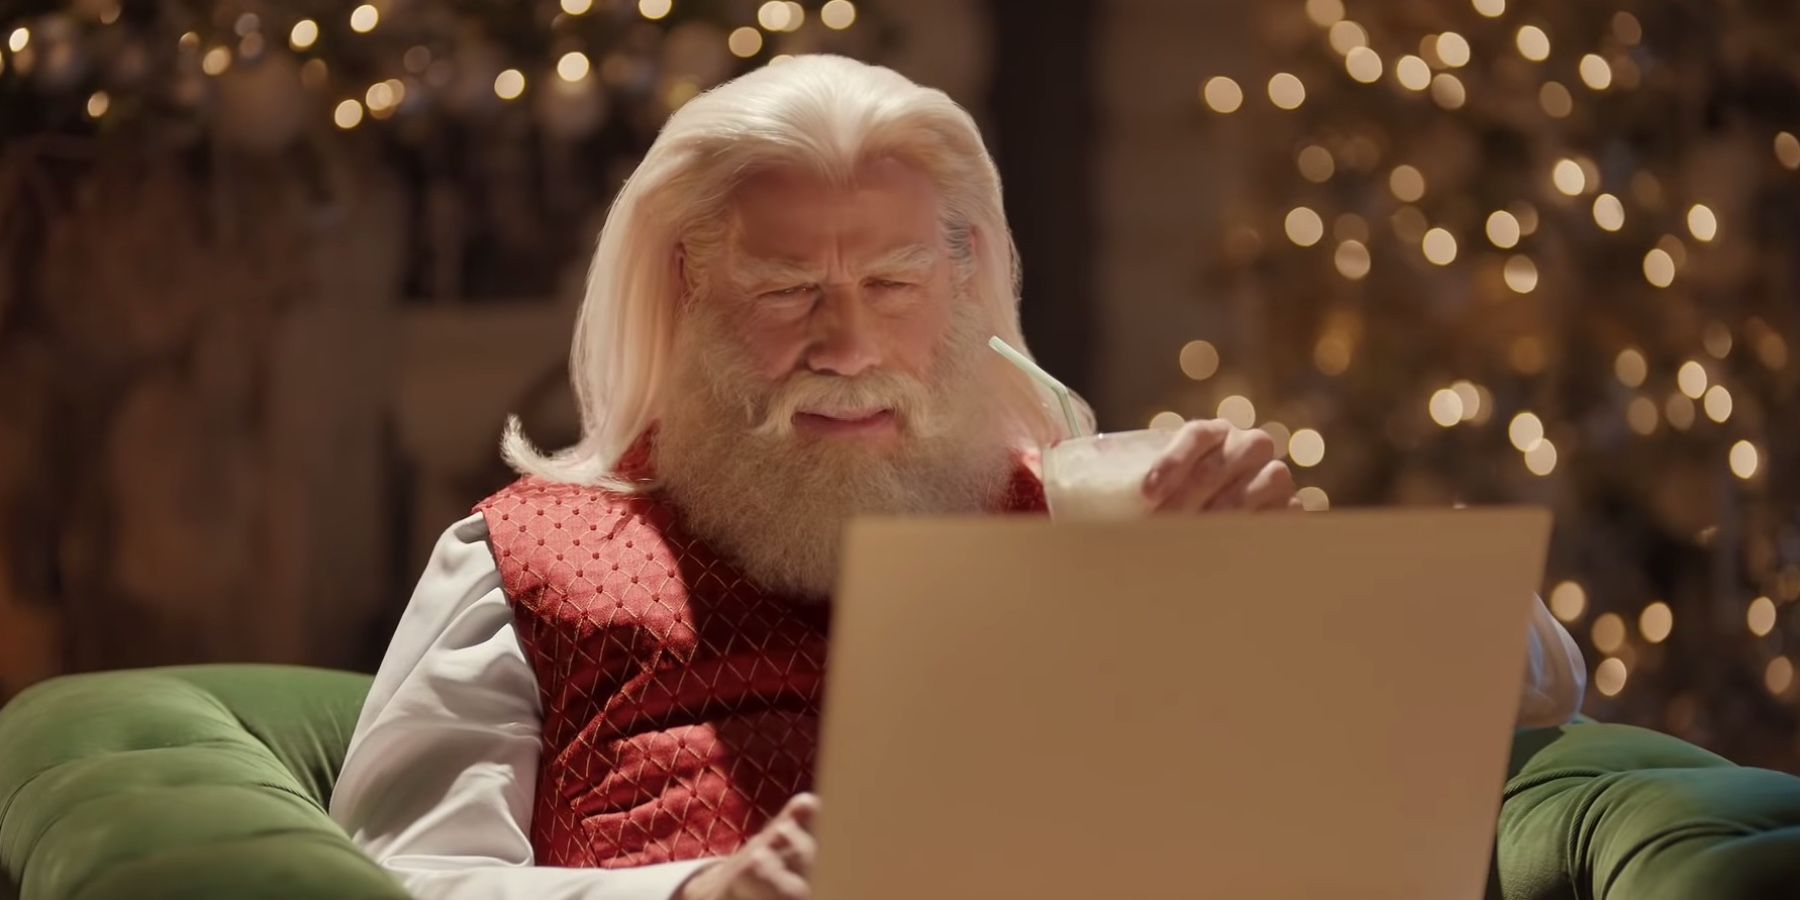 Who plays Santa in the new Capital One commercial?